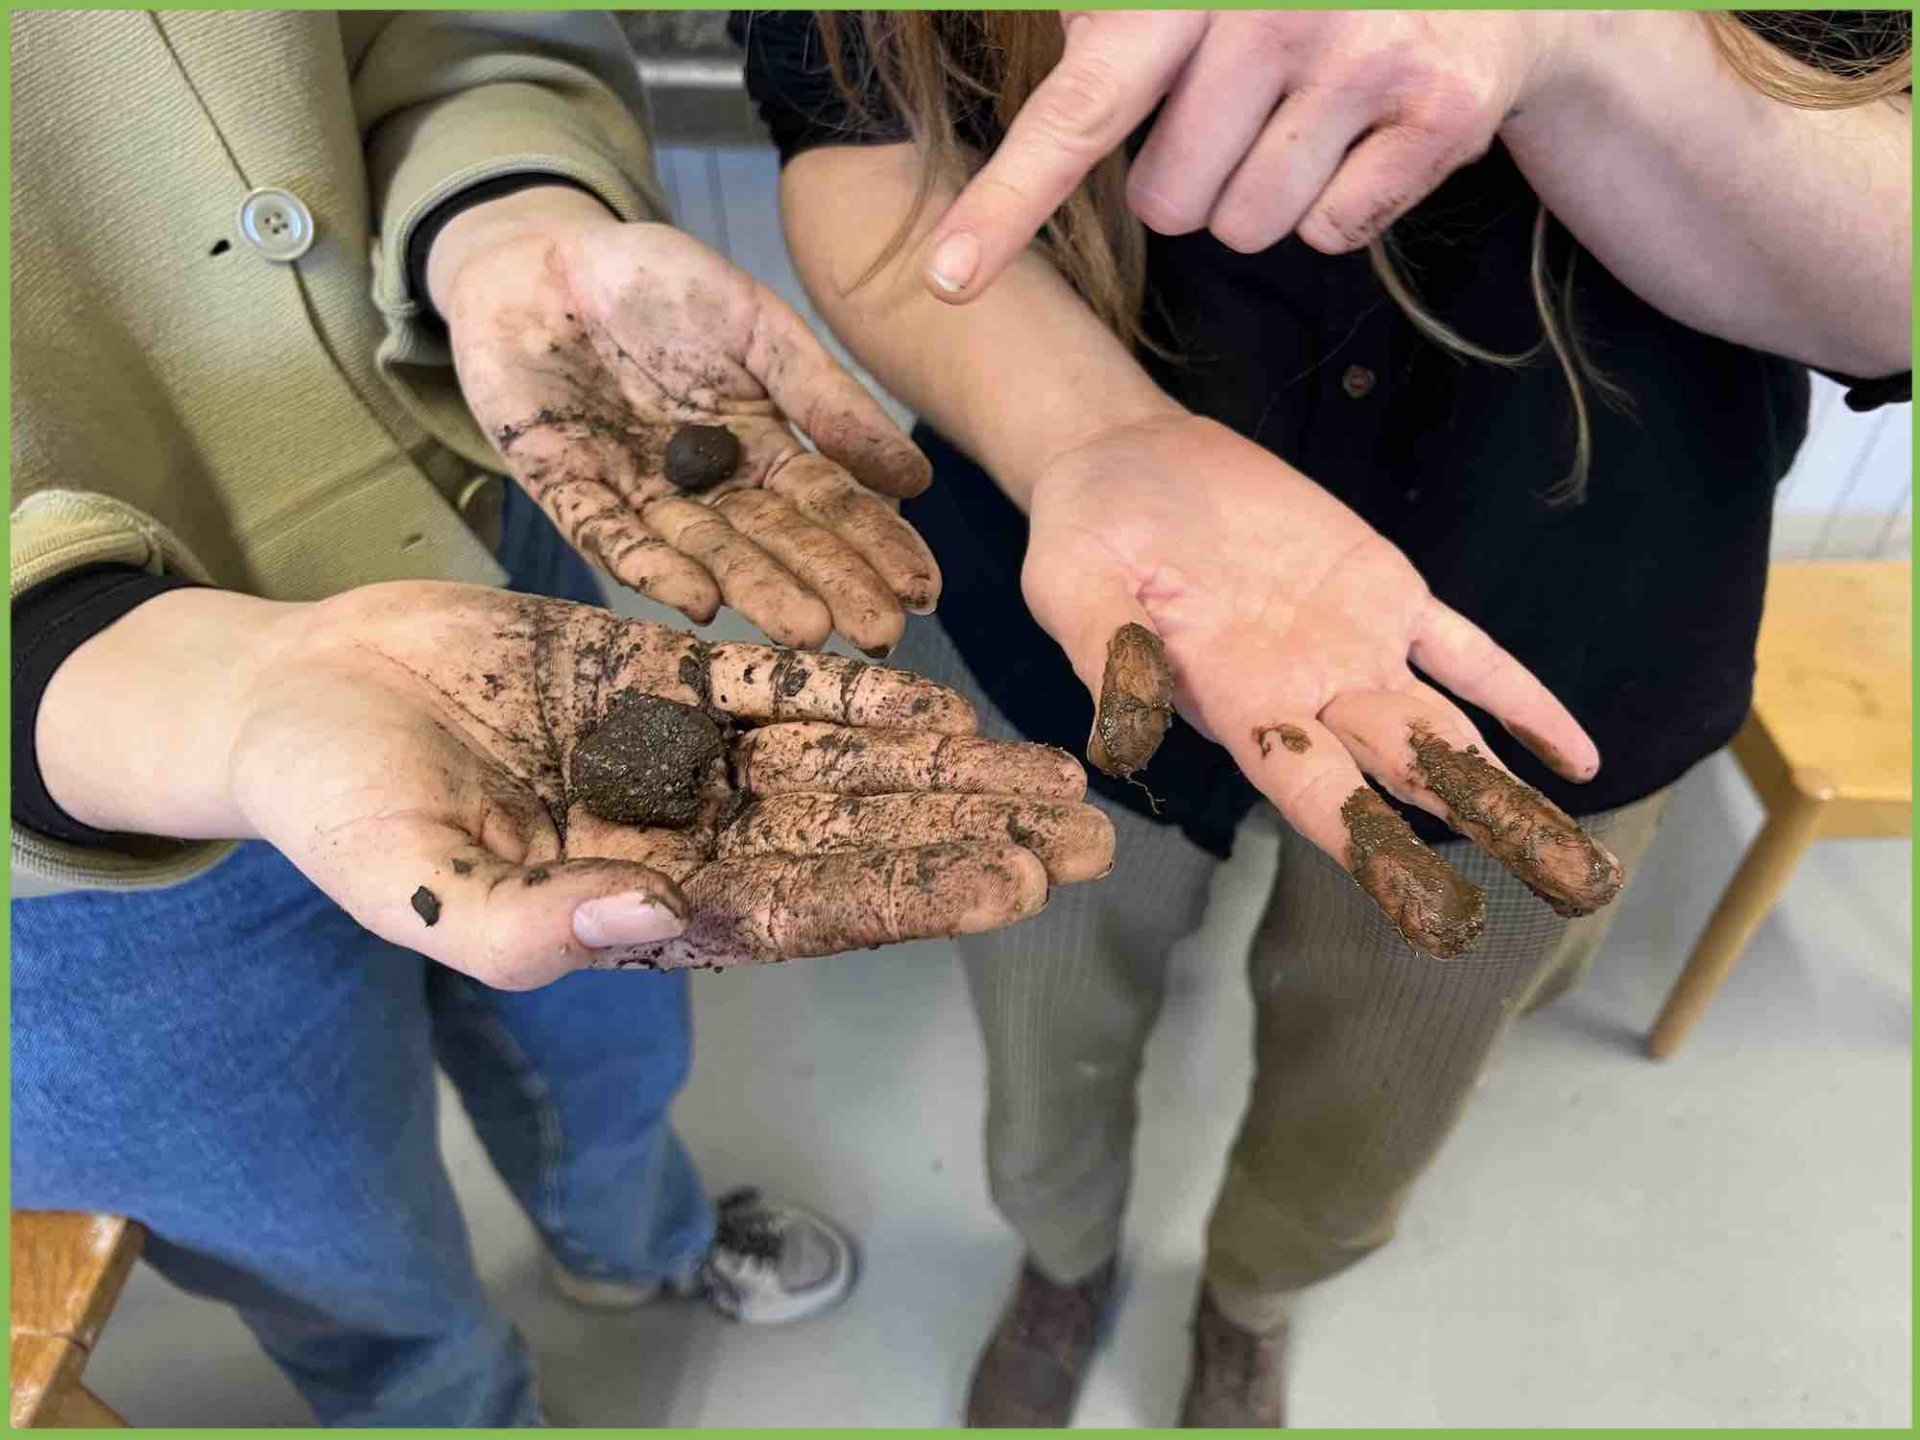 Photo of clumped soil in testers' hands 